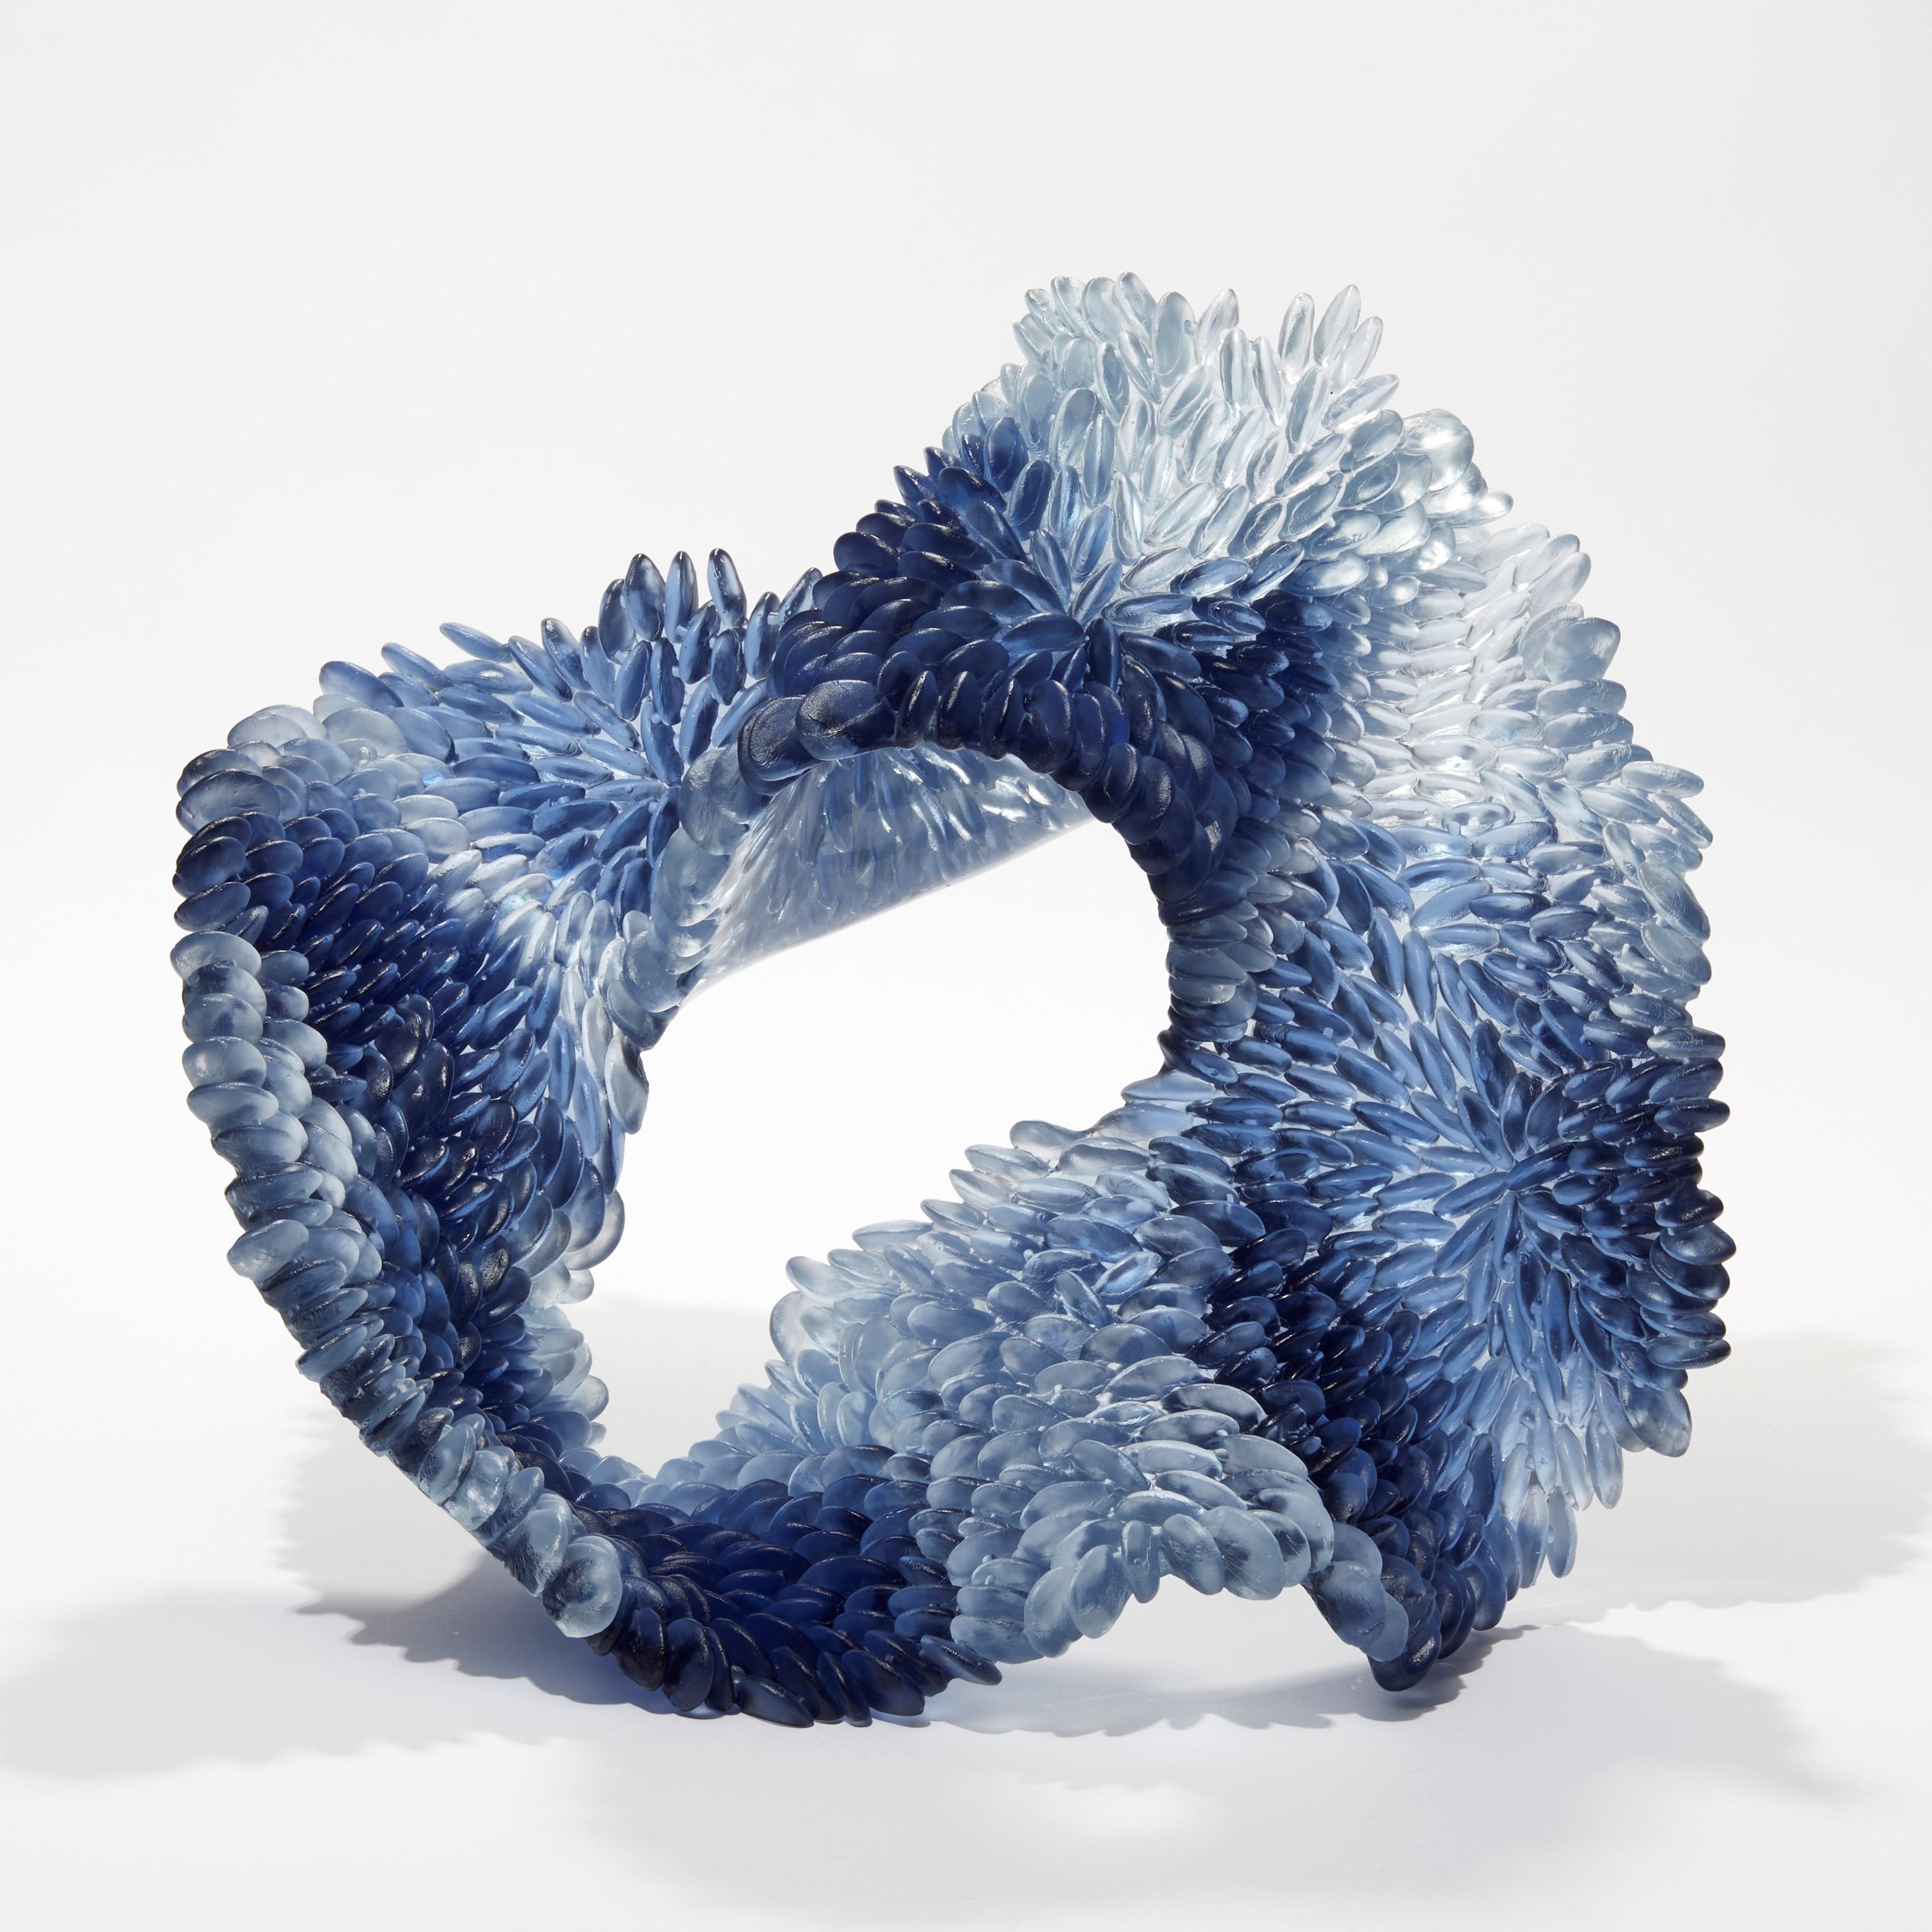 'Indigo Blues II' is a unique glass sculpture by the British artist, Nina Casson McGarva.

Casson McGarva firstly casts her glass in a flat mould where she introduces all of the beautifully detailed, scaled surface texture, all unique and to her